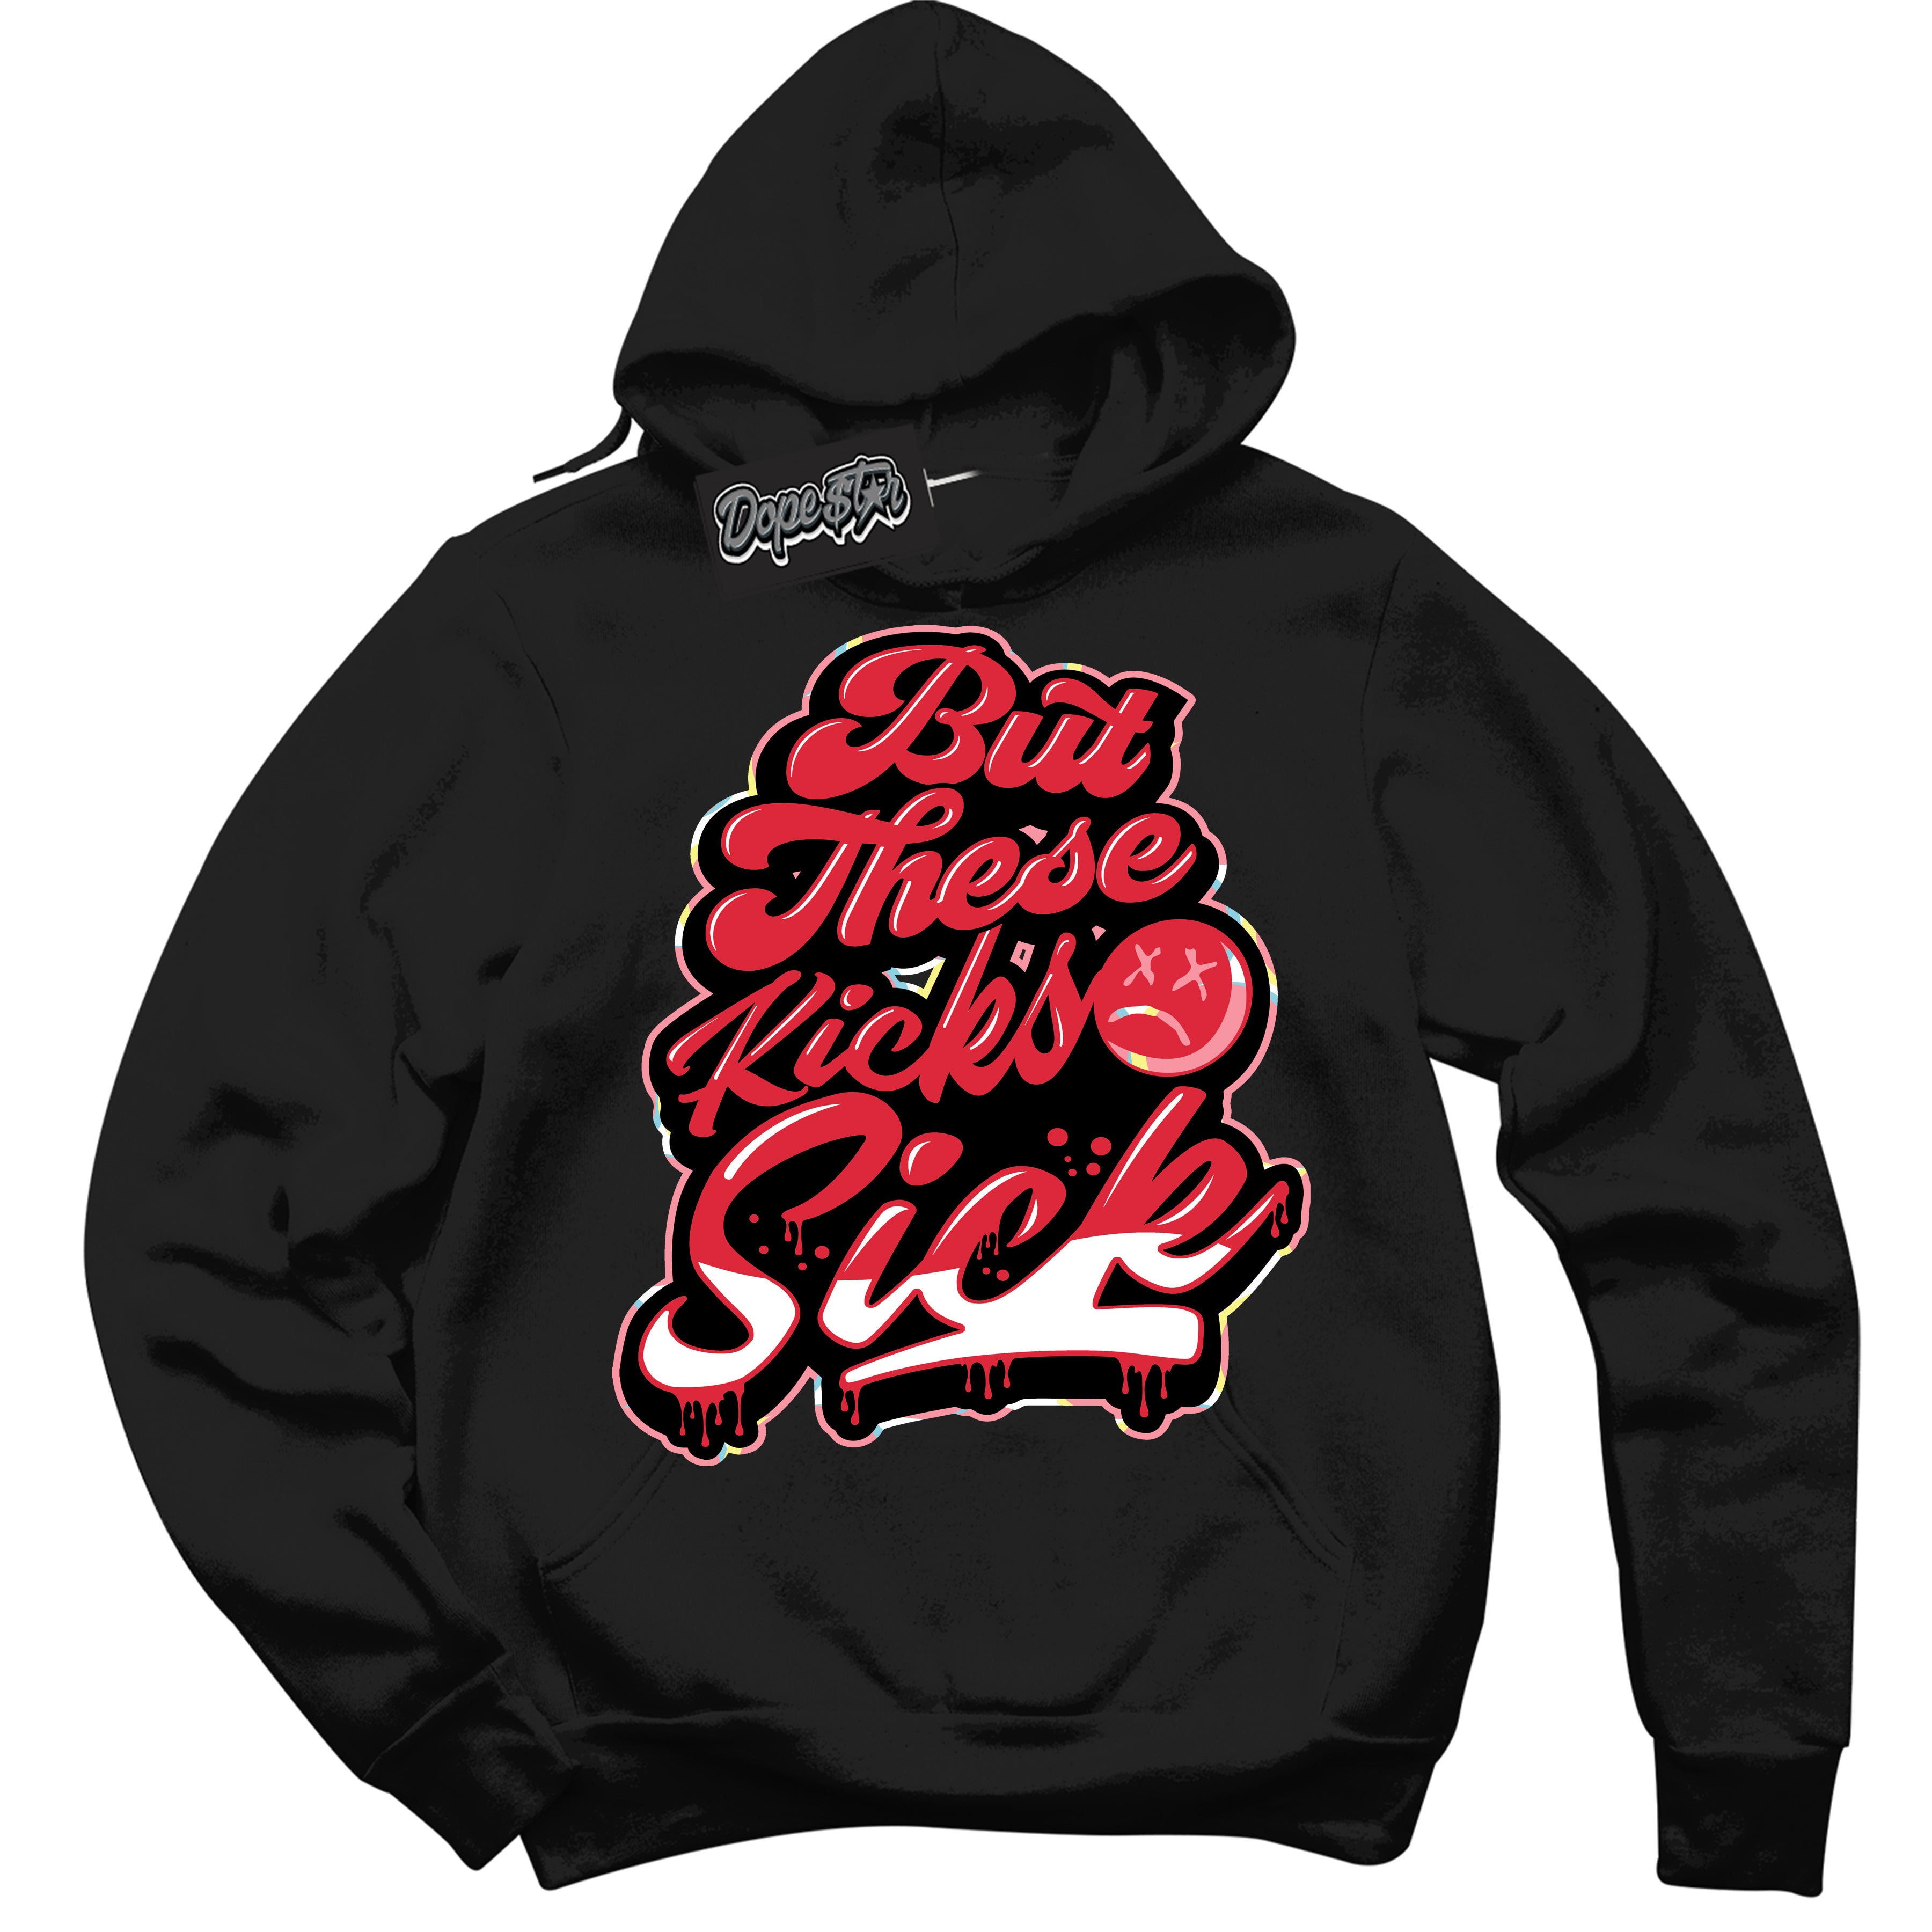 Cool Black Graphic DopeStar Hoodie with “ Kick Sick “ print, that perfectly matches Spider-Verse 1s sneakers